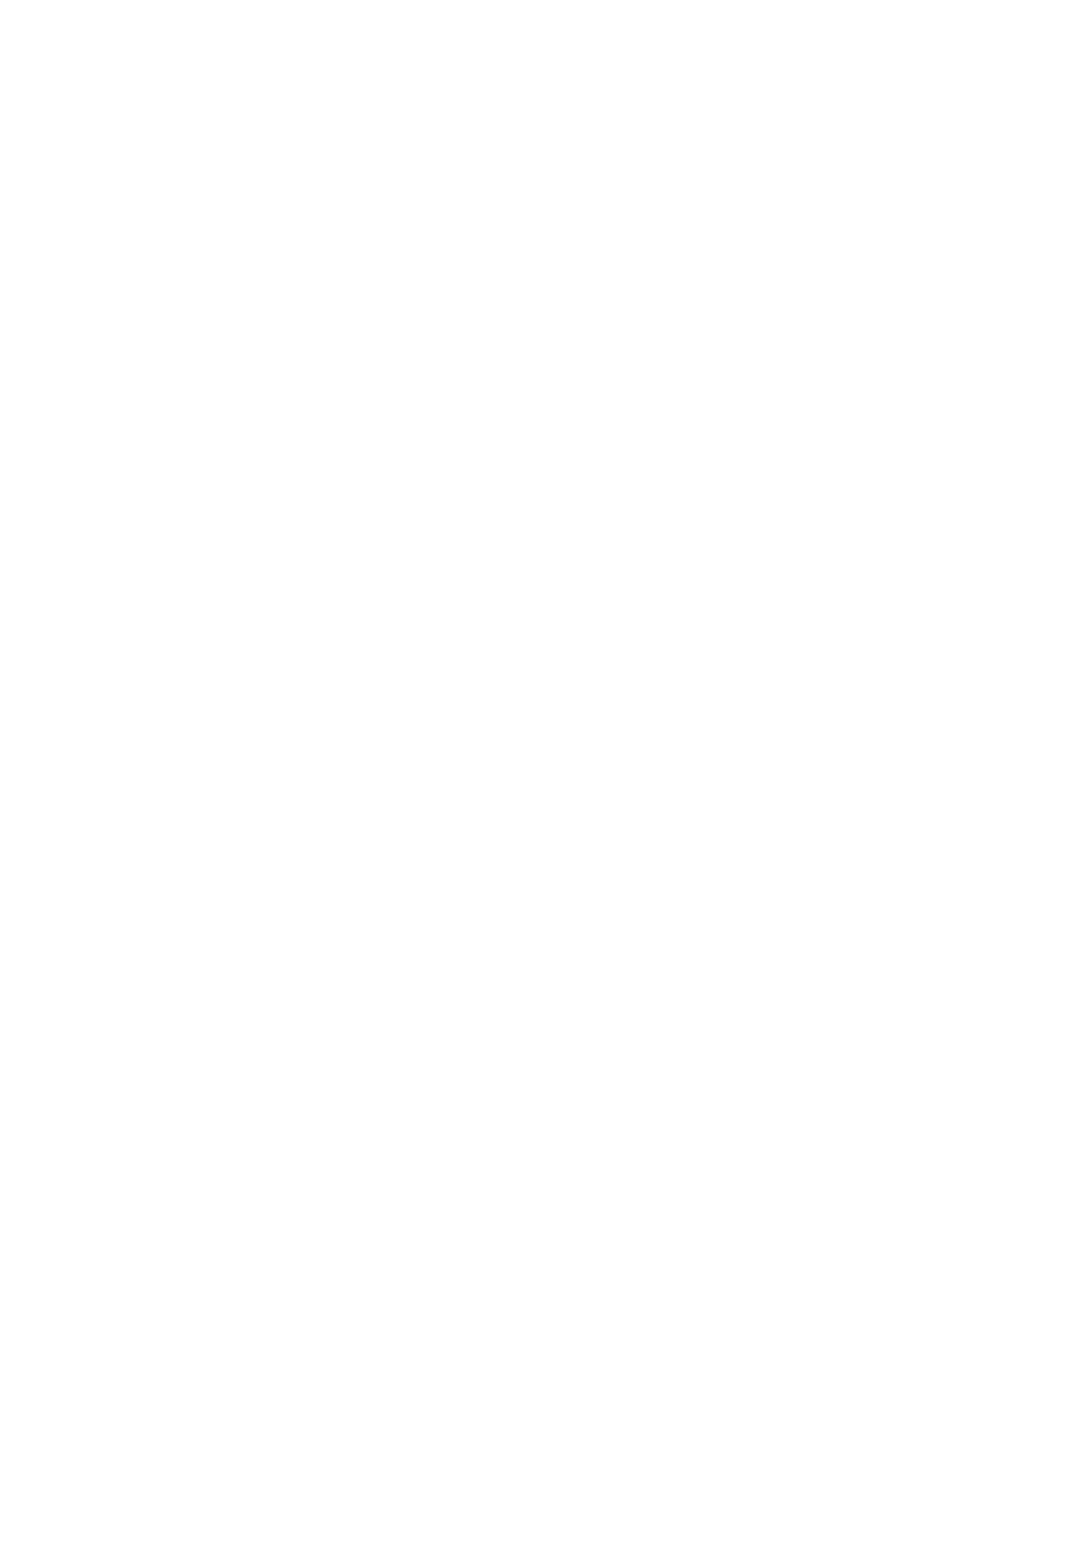 Li-Cycle logo for dark backgrounds (transparent PNG)